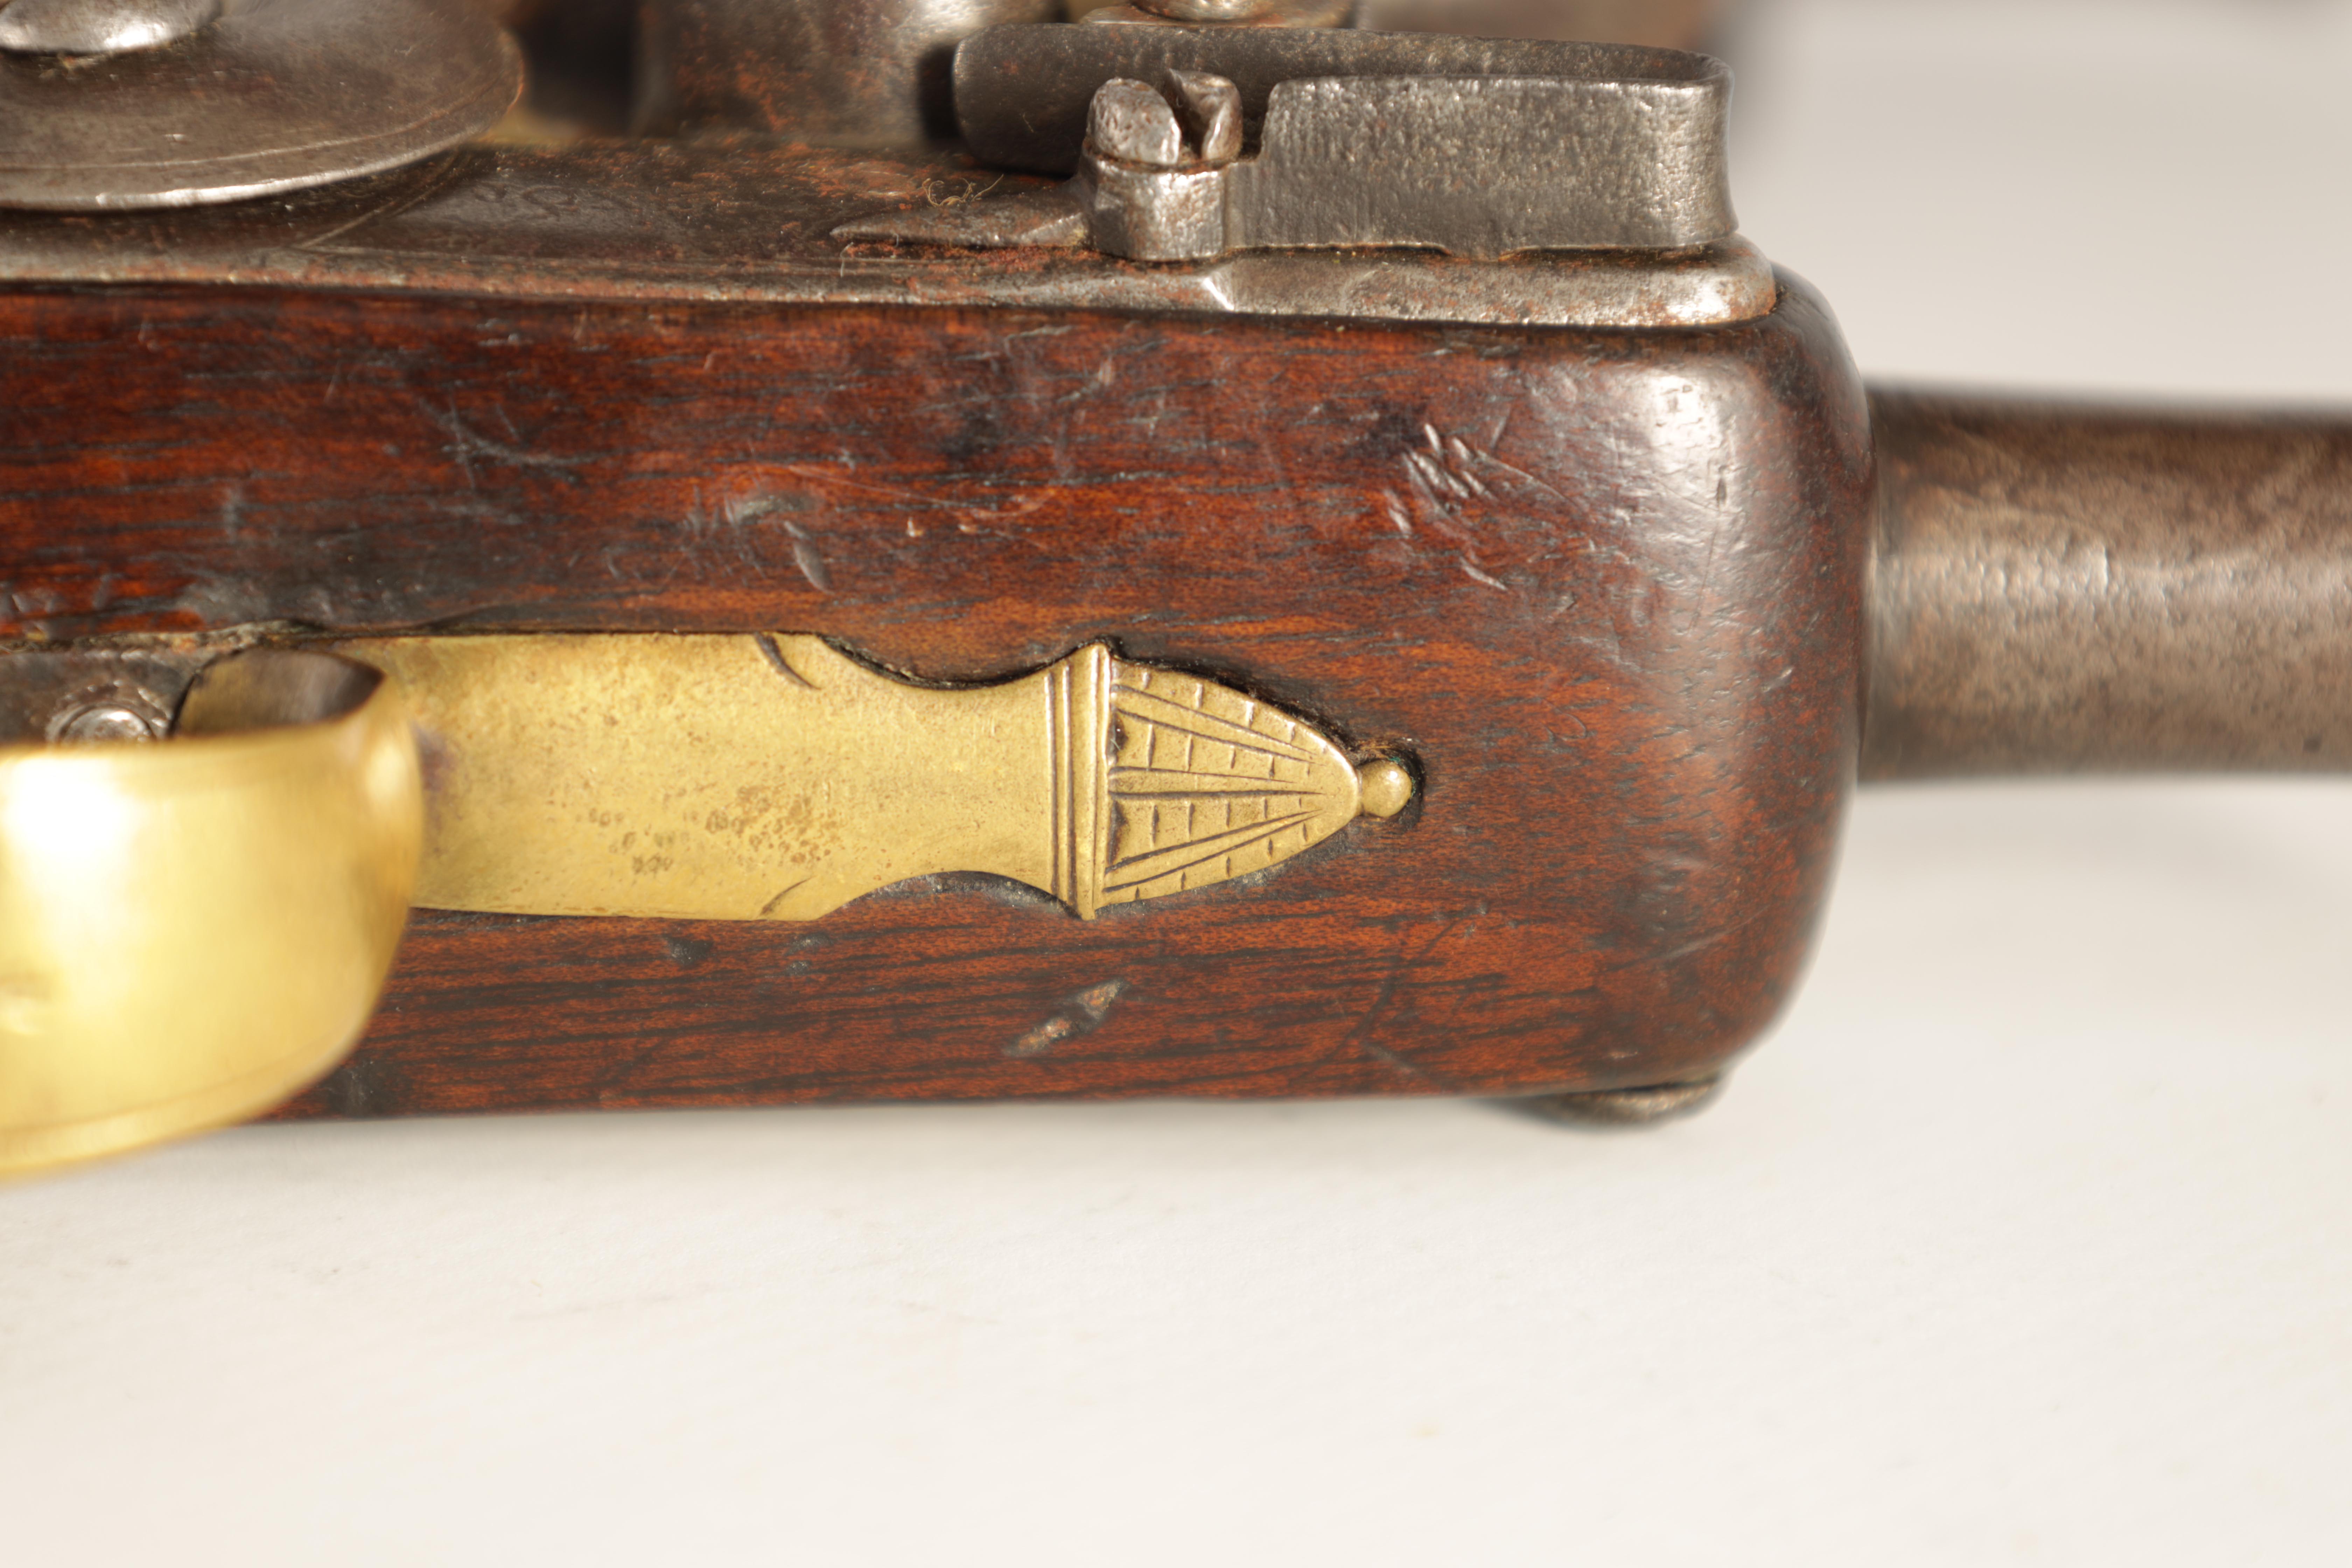 T. JONES. A PAIR OF EARLY 18TH CENTURY FLINTLOCK POCKET PISTOLS with turn-off cannon barrel, - Image 6 of 14